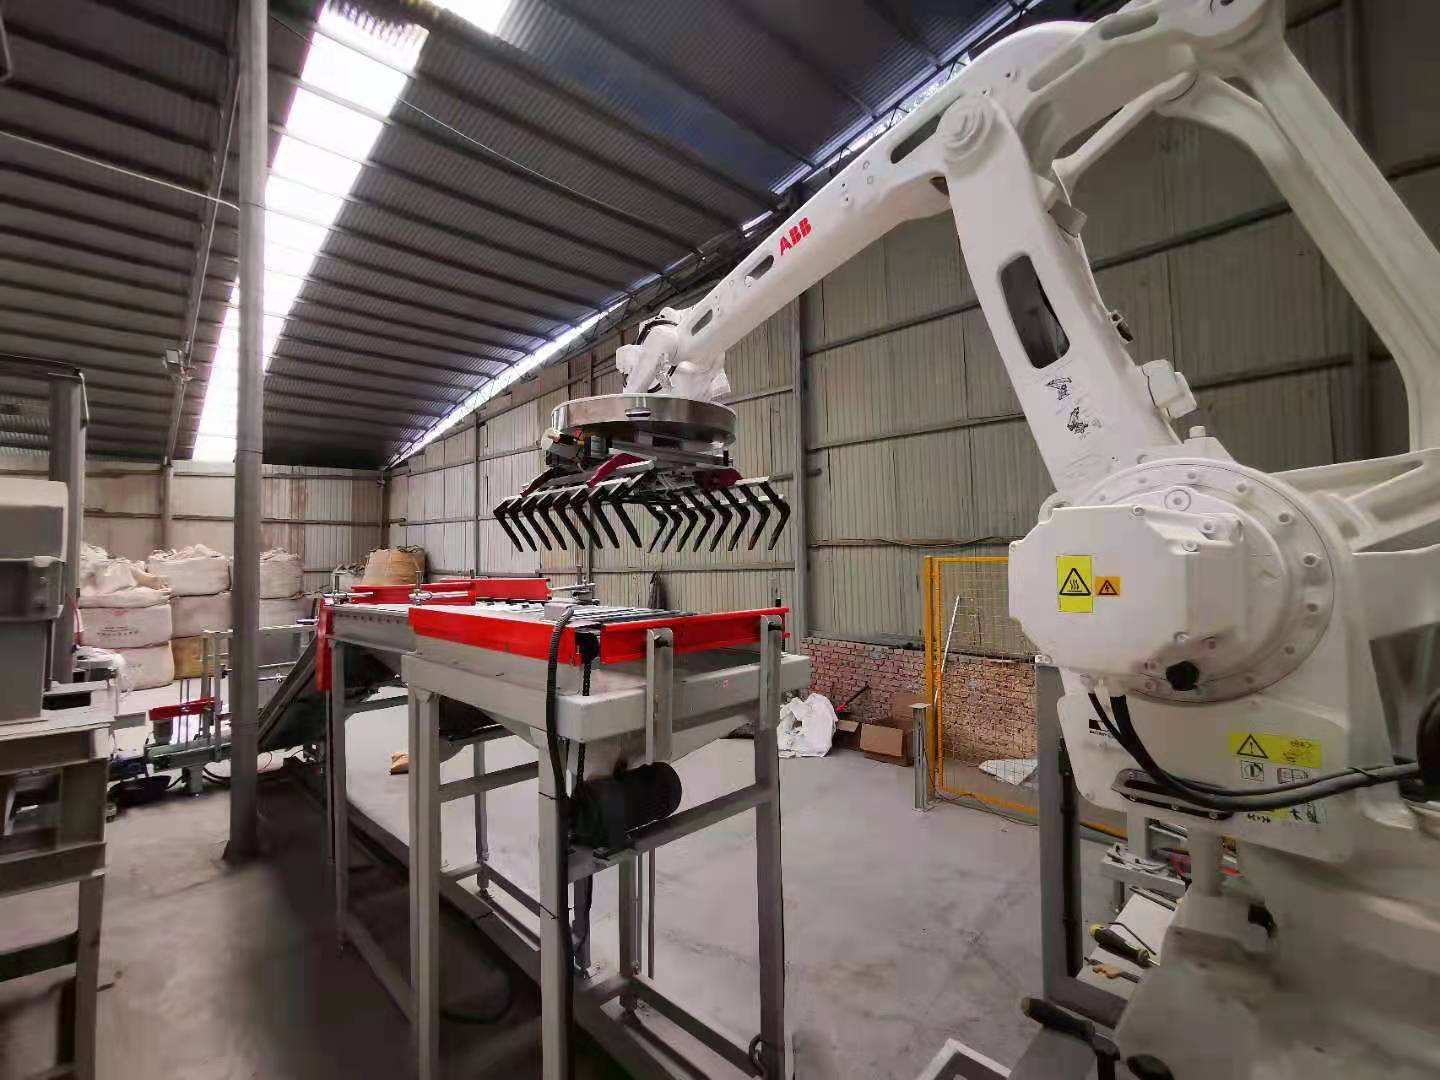 Oem Automatic industrial robot palletizer for bags and carton box